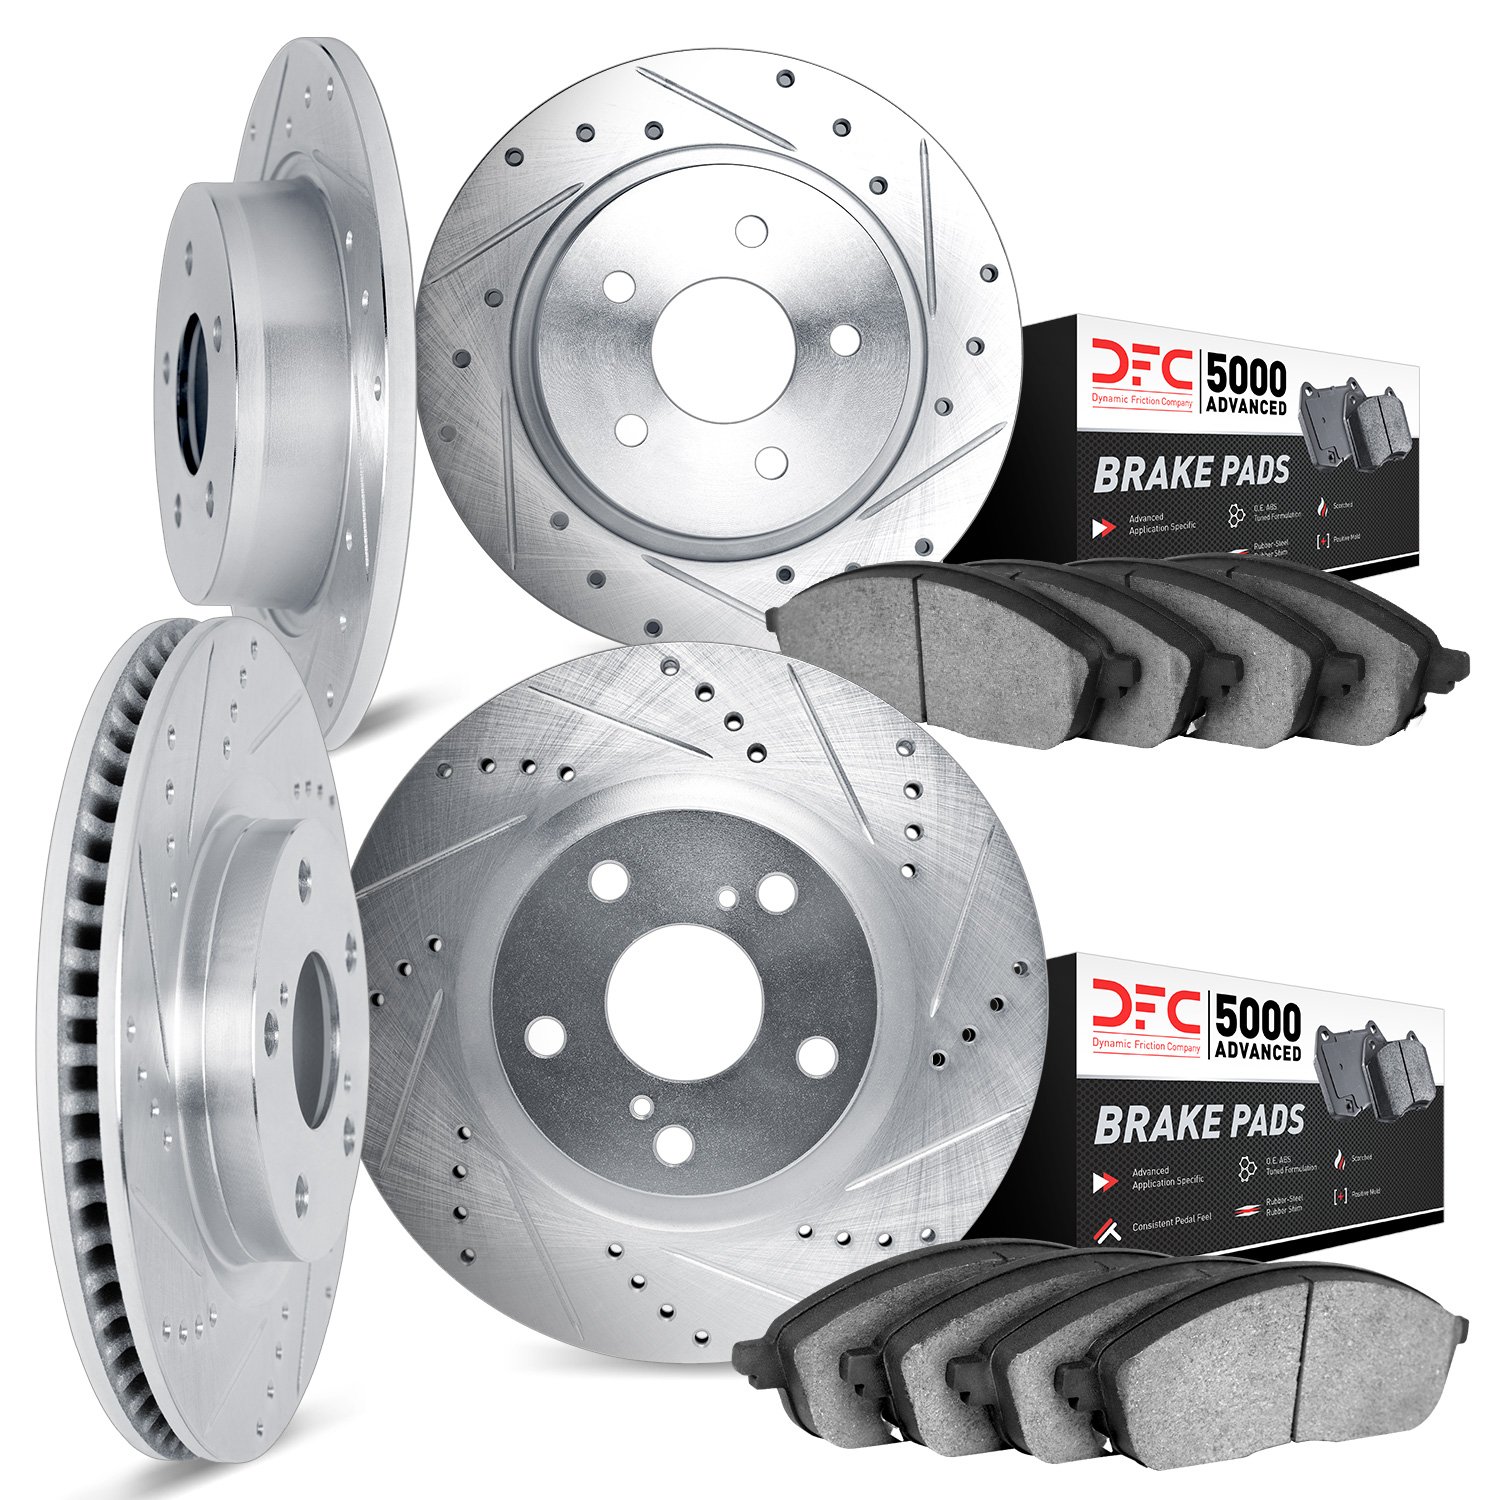 7504-67088 Drilled/Slotted Brake Rotors w/5000 Advanced Brake Pads Kit [Silver], 1991-1993 Infiniti/Nissan, Position: Front and